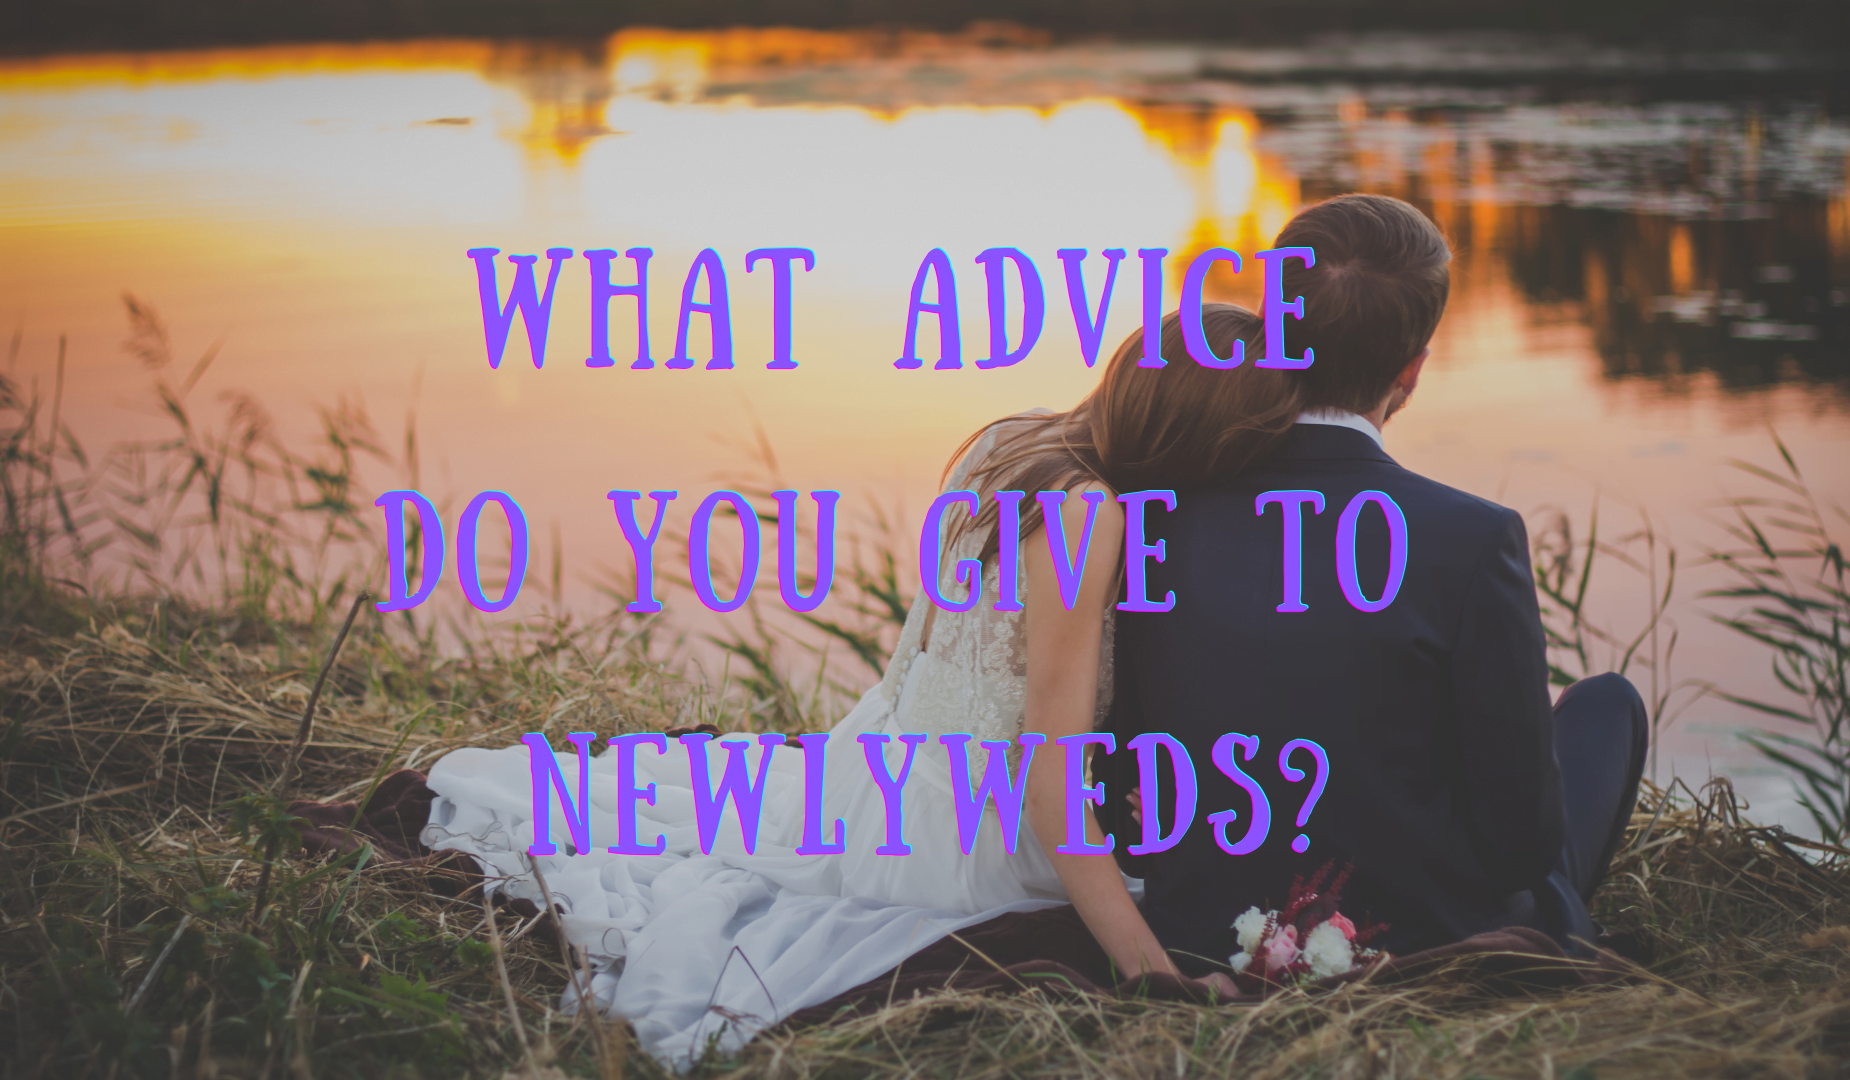 What Advice Do You Give To Newlyweds?